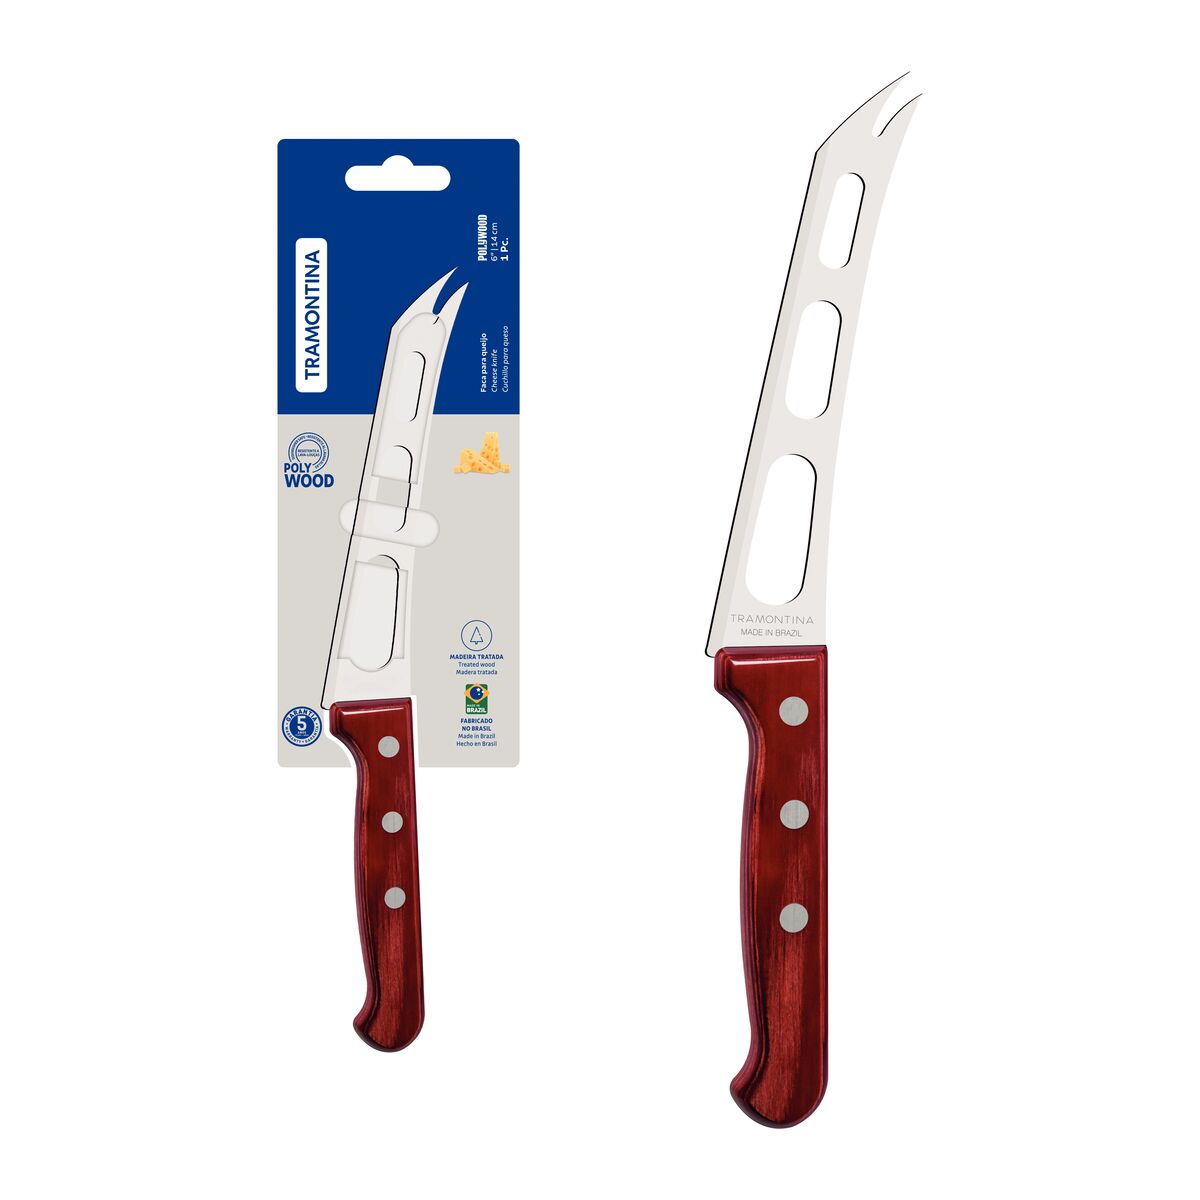 Tramontina Polywood 6" Cheese knife With Stainless-Steel Blade and Red Treated Wood Handle